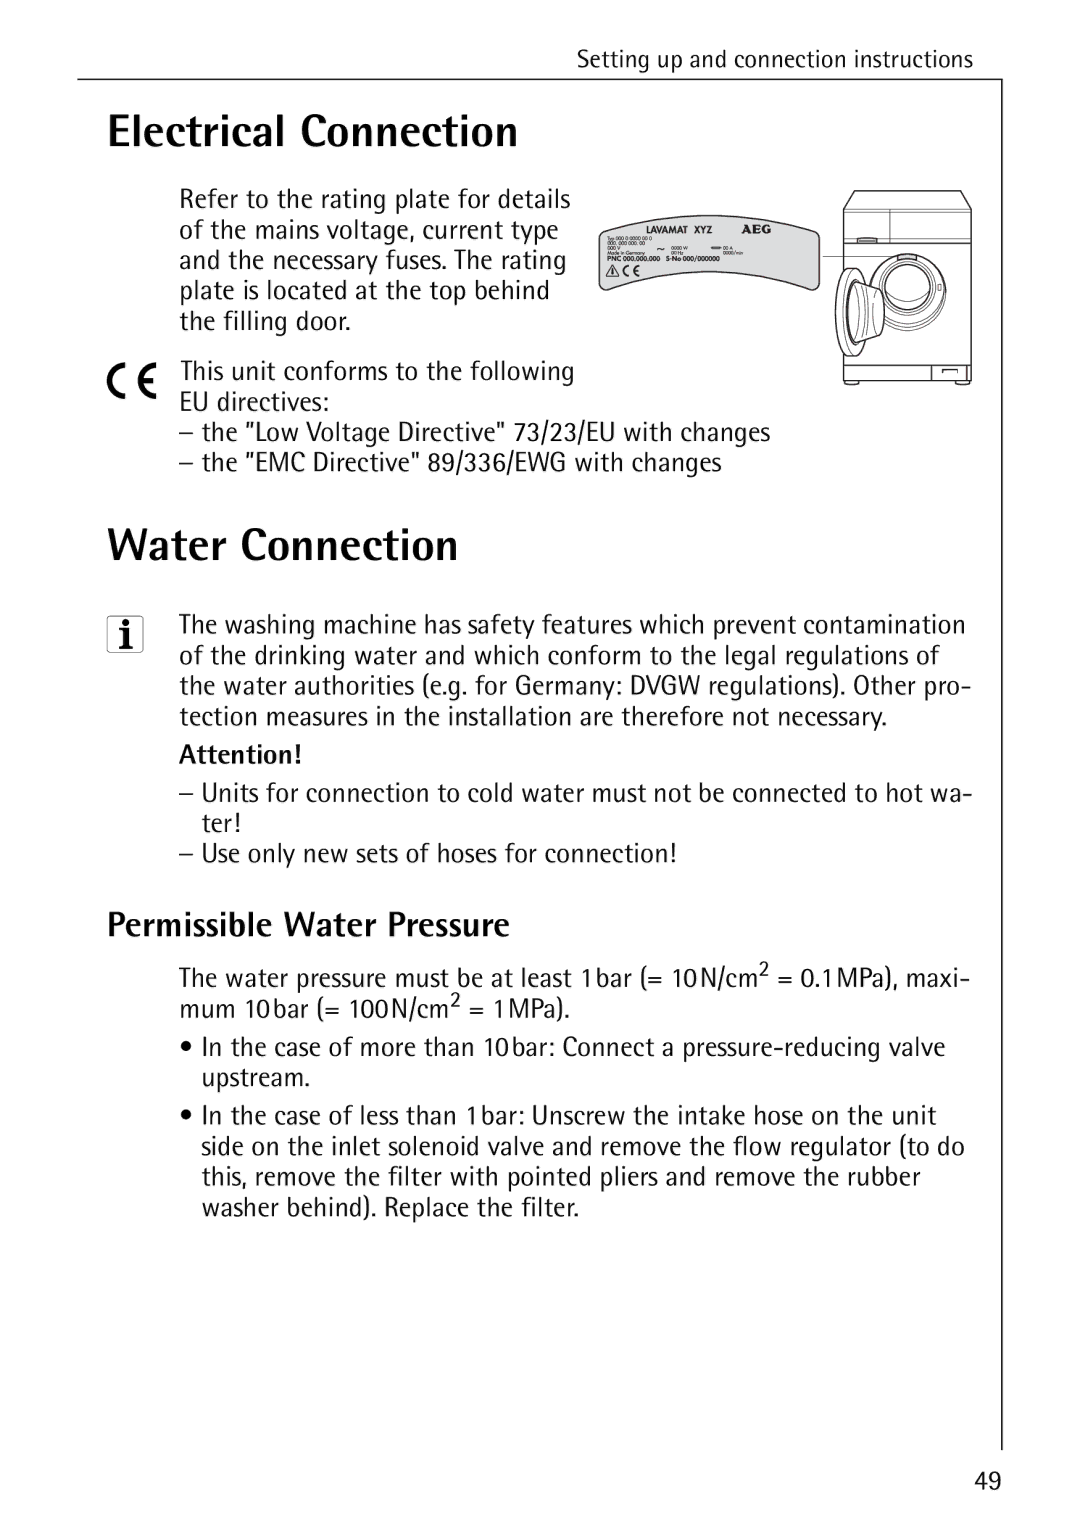 AEG 82730 manual Electrical Connection, Water Connection, Permissible Water Pressure 